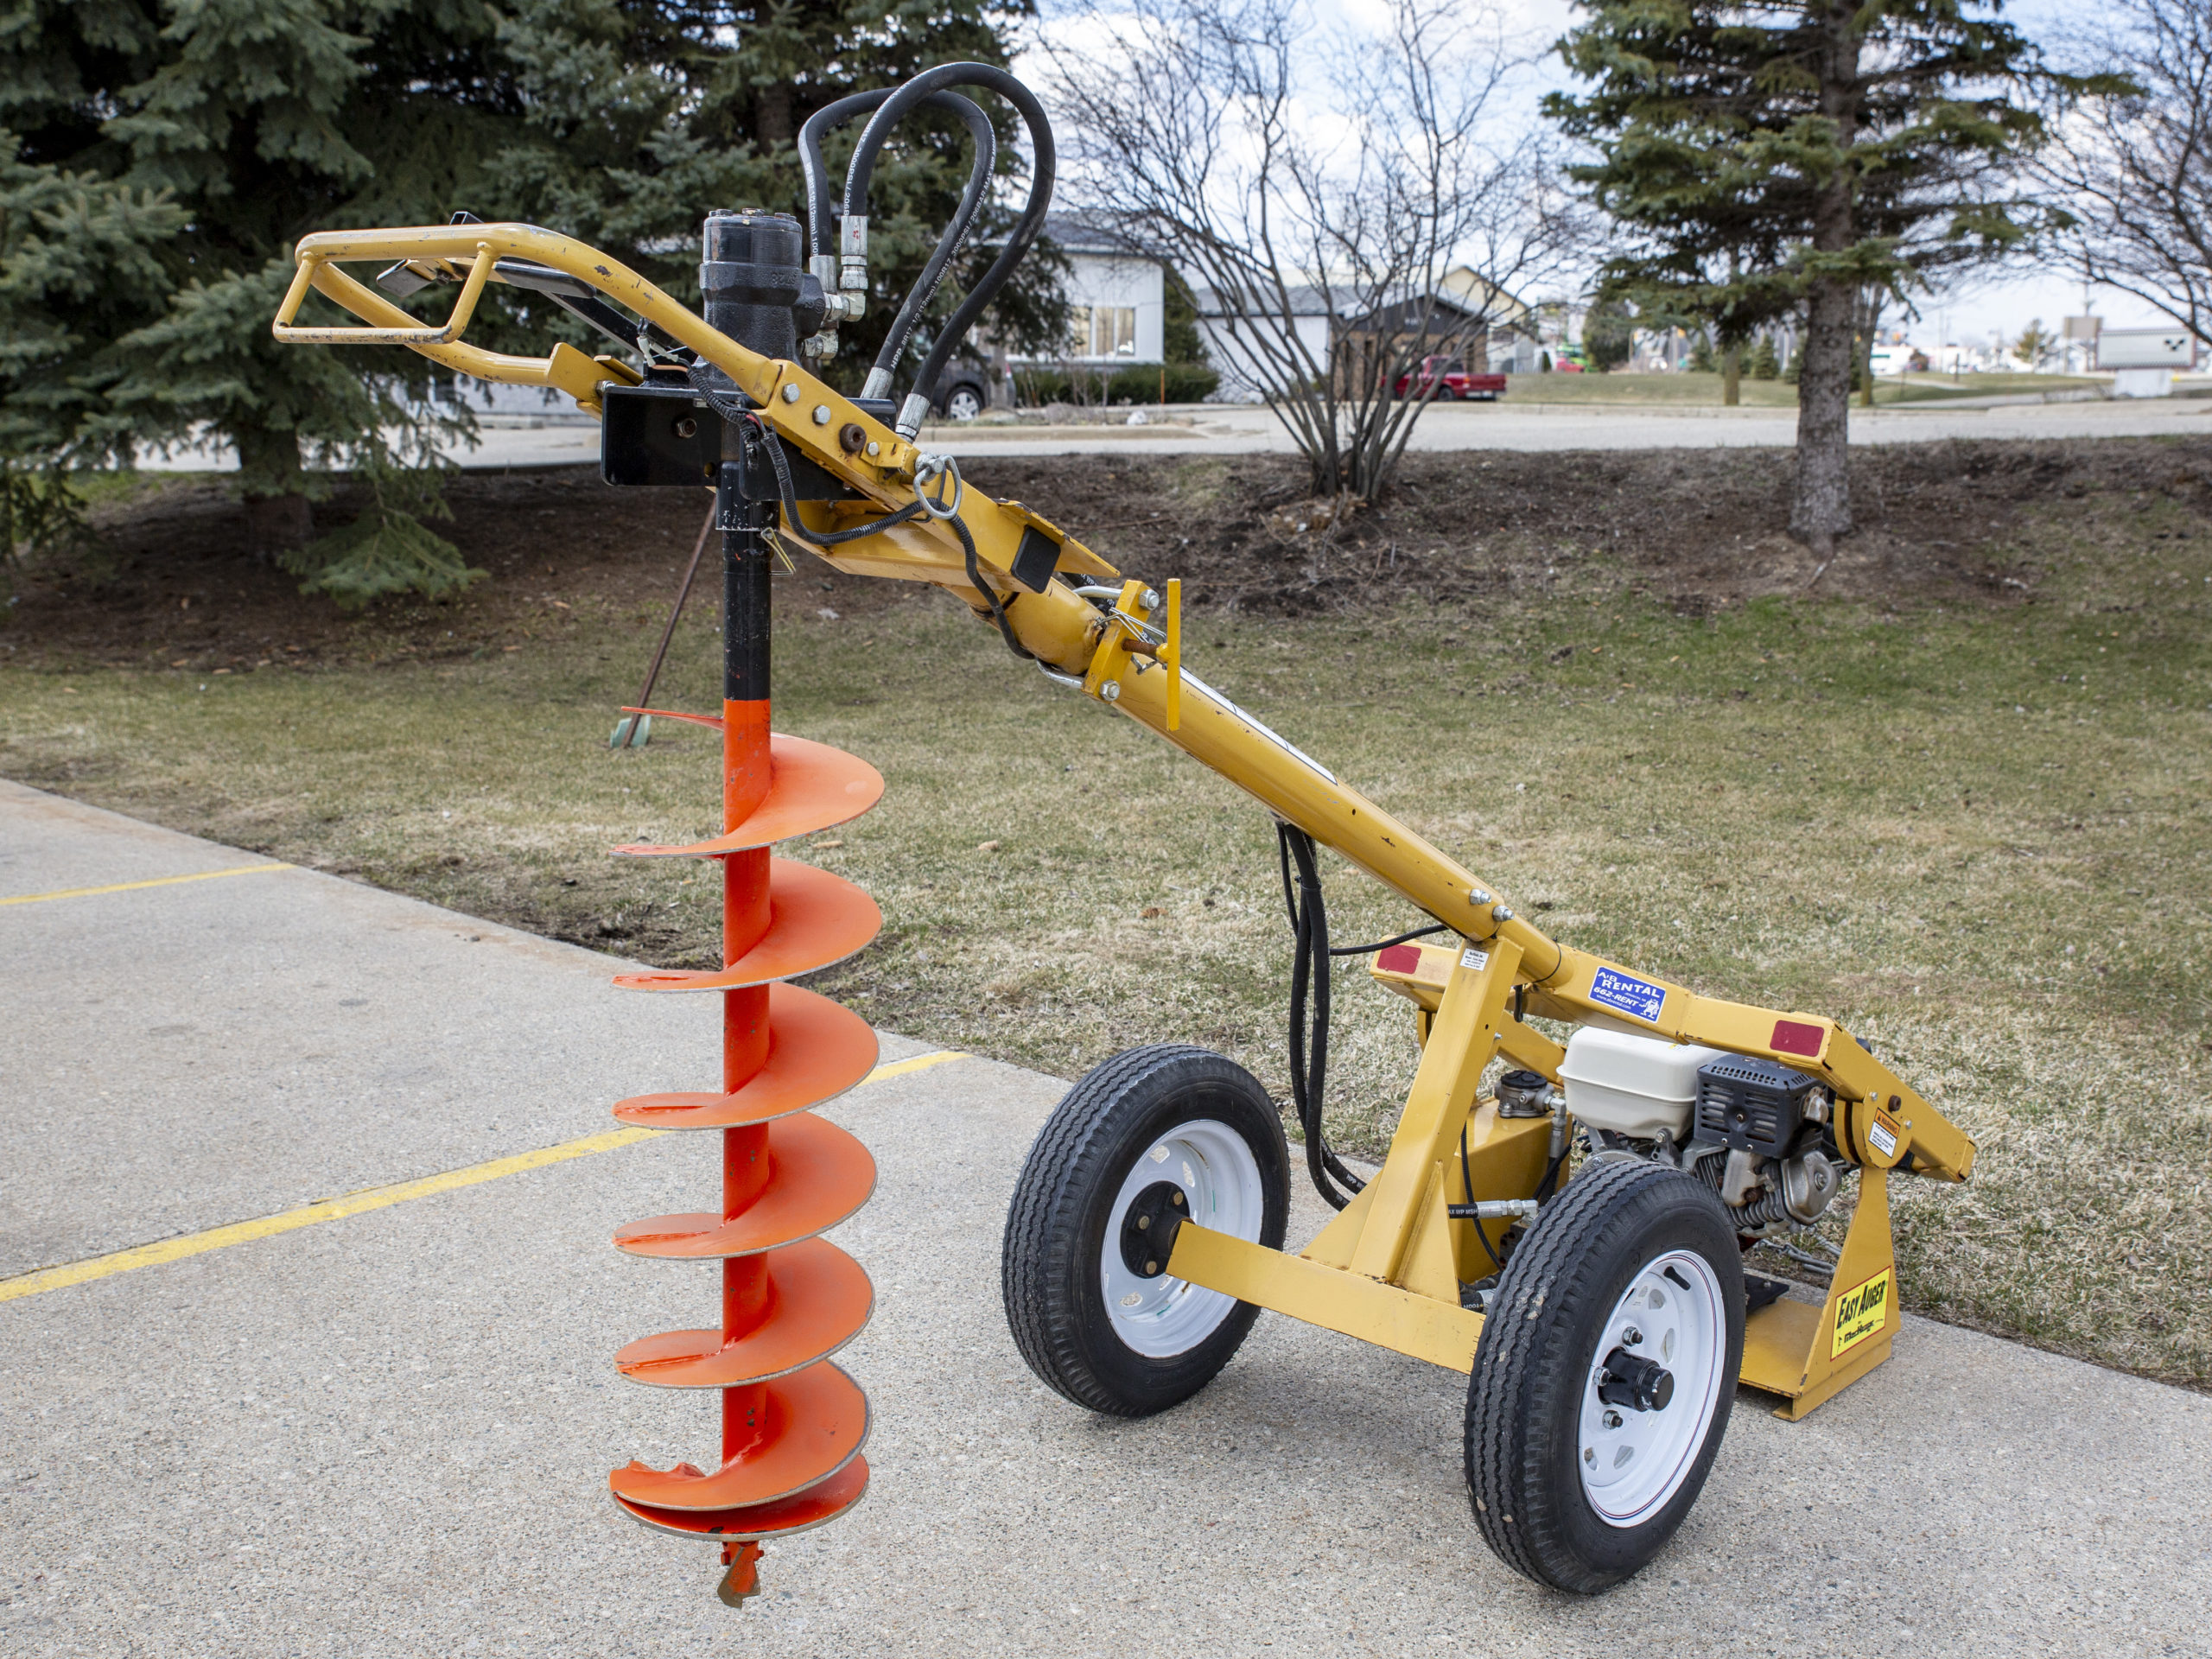 What Is an Auger, and What Are They Typically Used For?